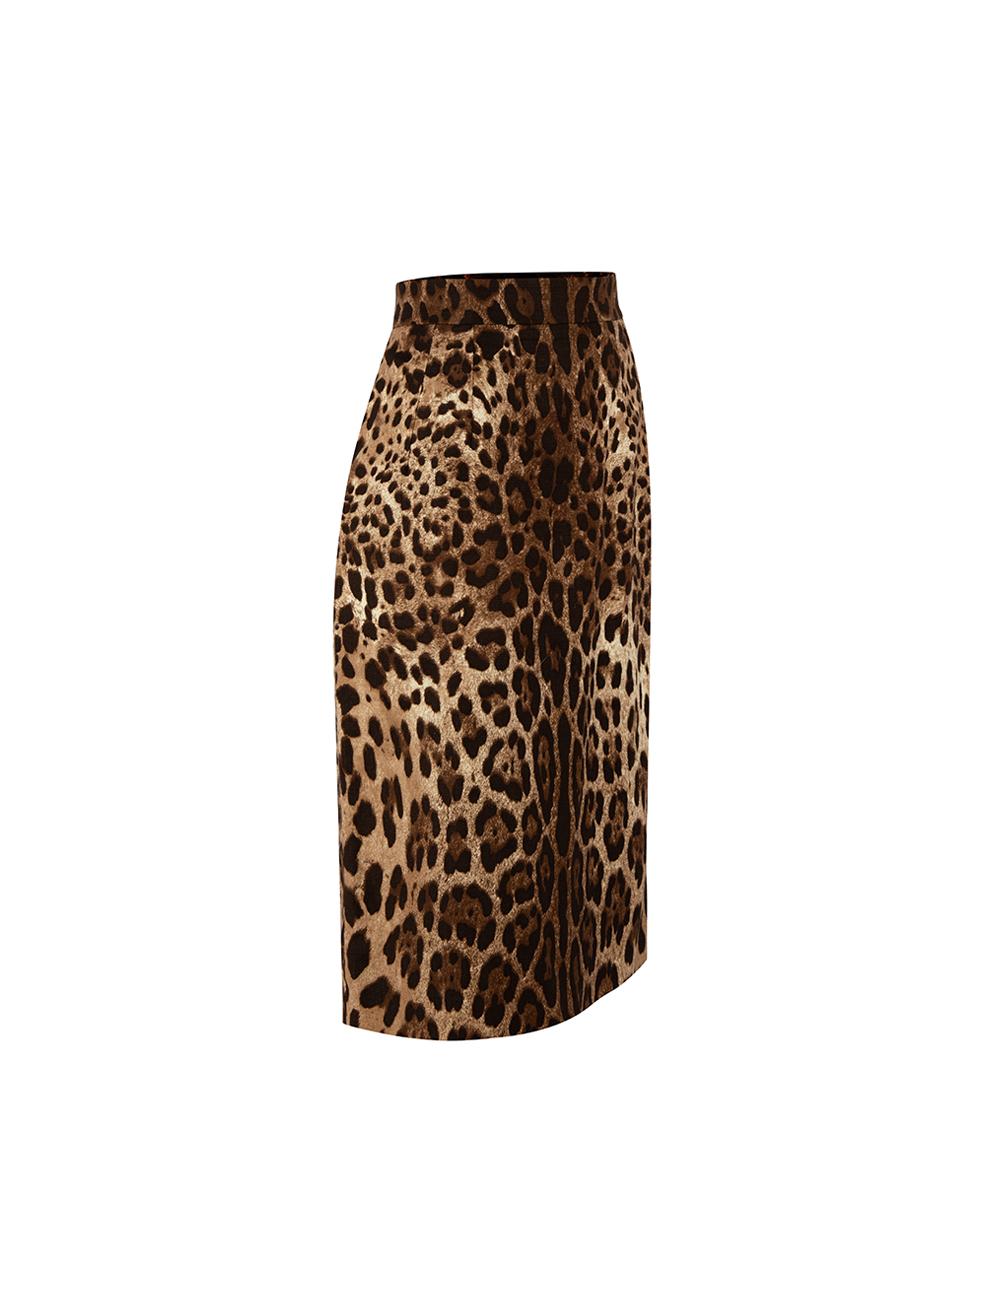 CONDITION is Very good. Hardly any visible wear to skirt is evident on this used Dolce & Gabbana designer resale item.



Details


Brown

Cotton

Pencil skirt

Knee length

Leopard pattern

Back zip closure with hooks and eyes





Made in